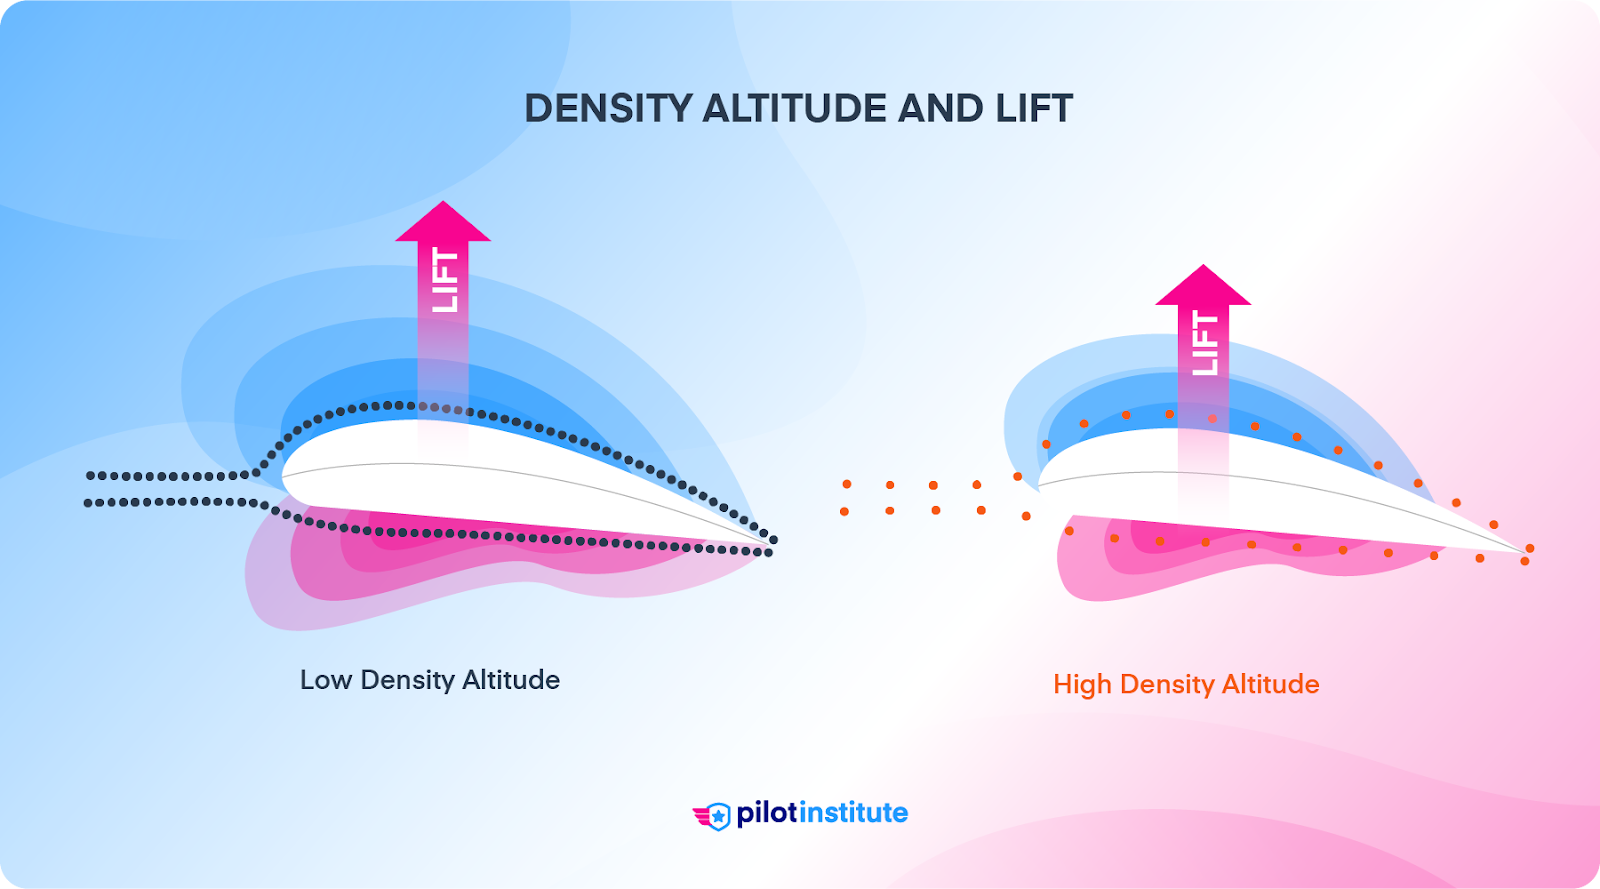 Two airfoils showing how increased density altitude decreases lift.